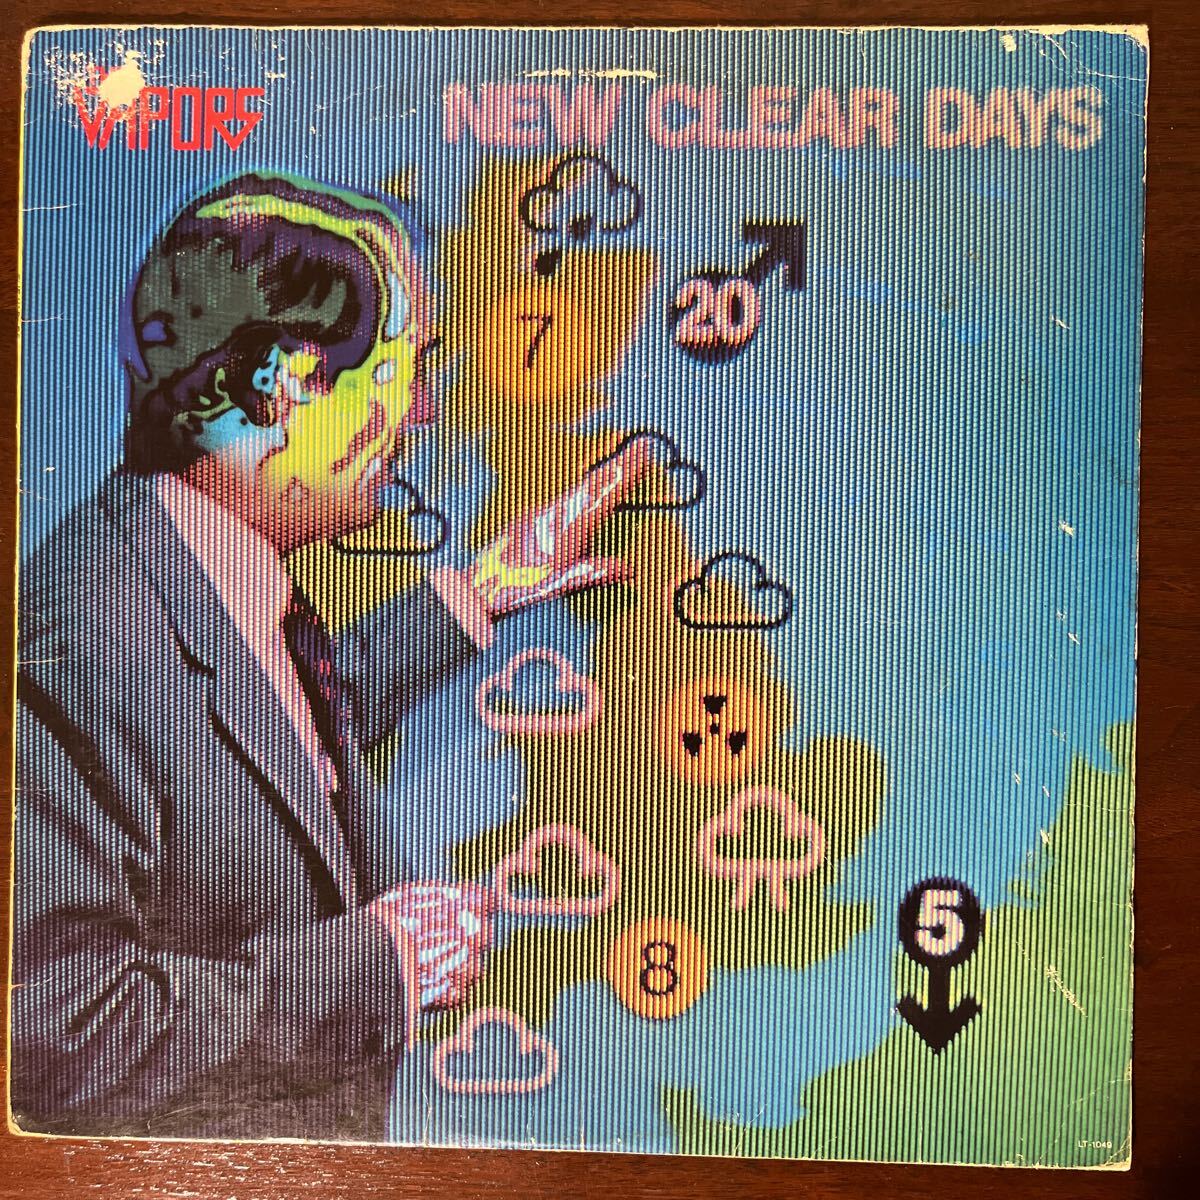 【LP】The Vapors / New Clear Days United Artists Records LT-1049 US Orig 1980 検) New Wave Power Pop Punk パンク天国_画像1